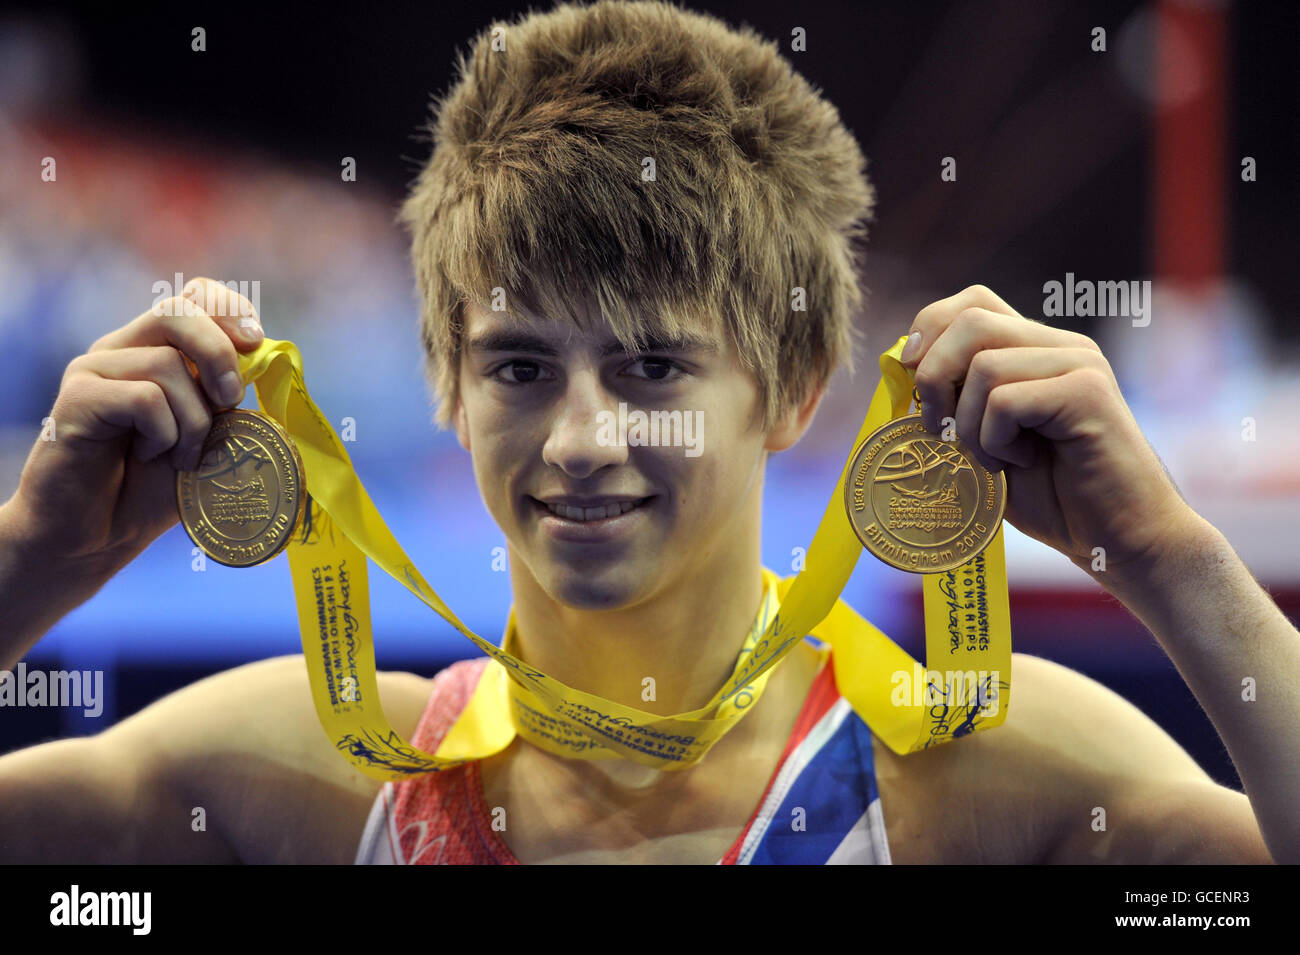 Great Britain's Max Whitlock poses after winning gold on the floor and pommel horse during the Individual Apparatus Final during the European Artistic Championships at the NIA, Birmingham. Stock Photo